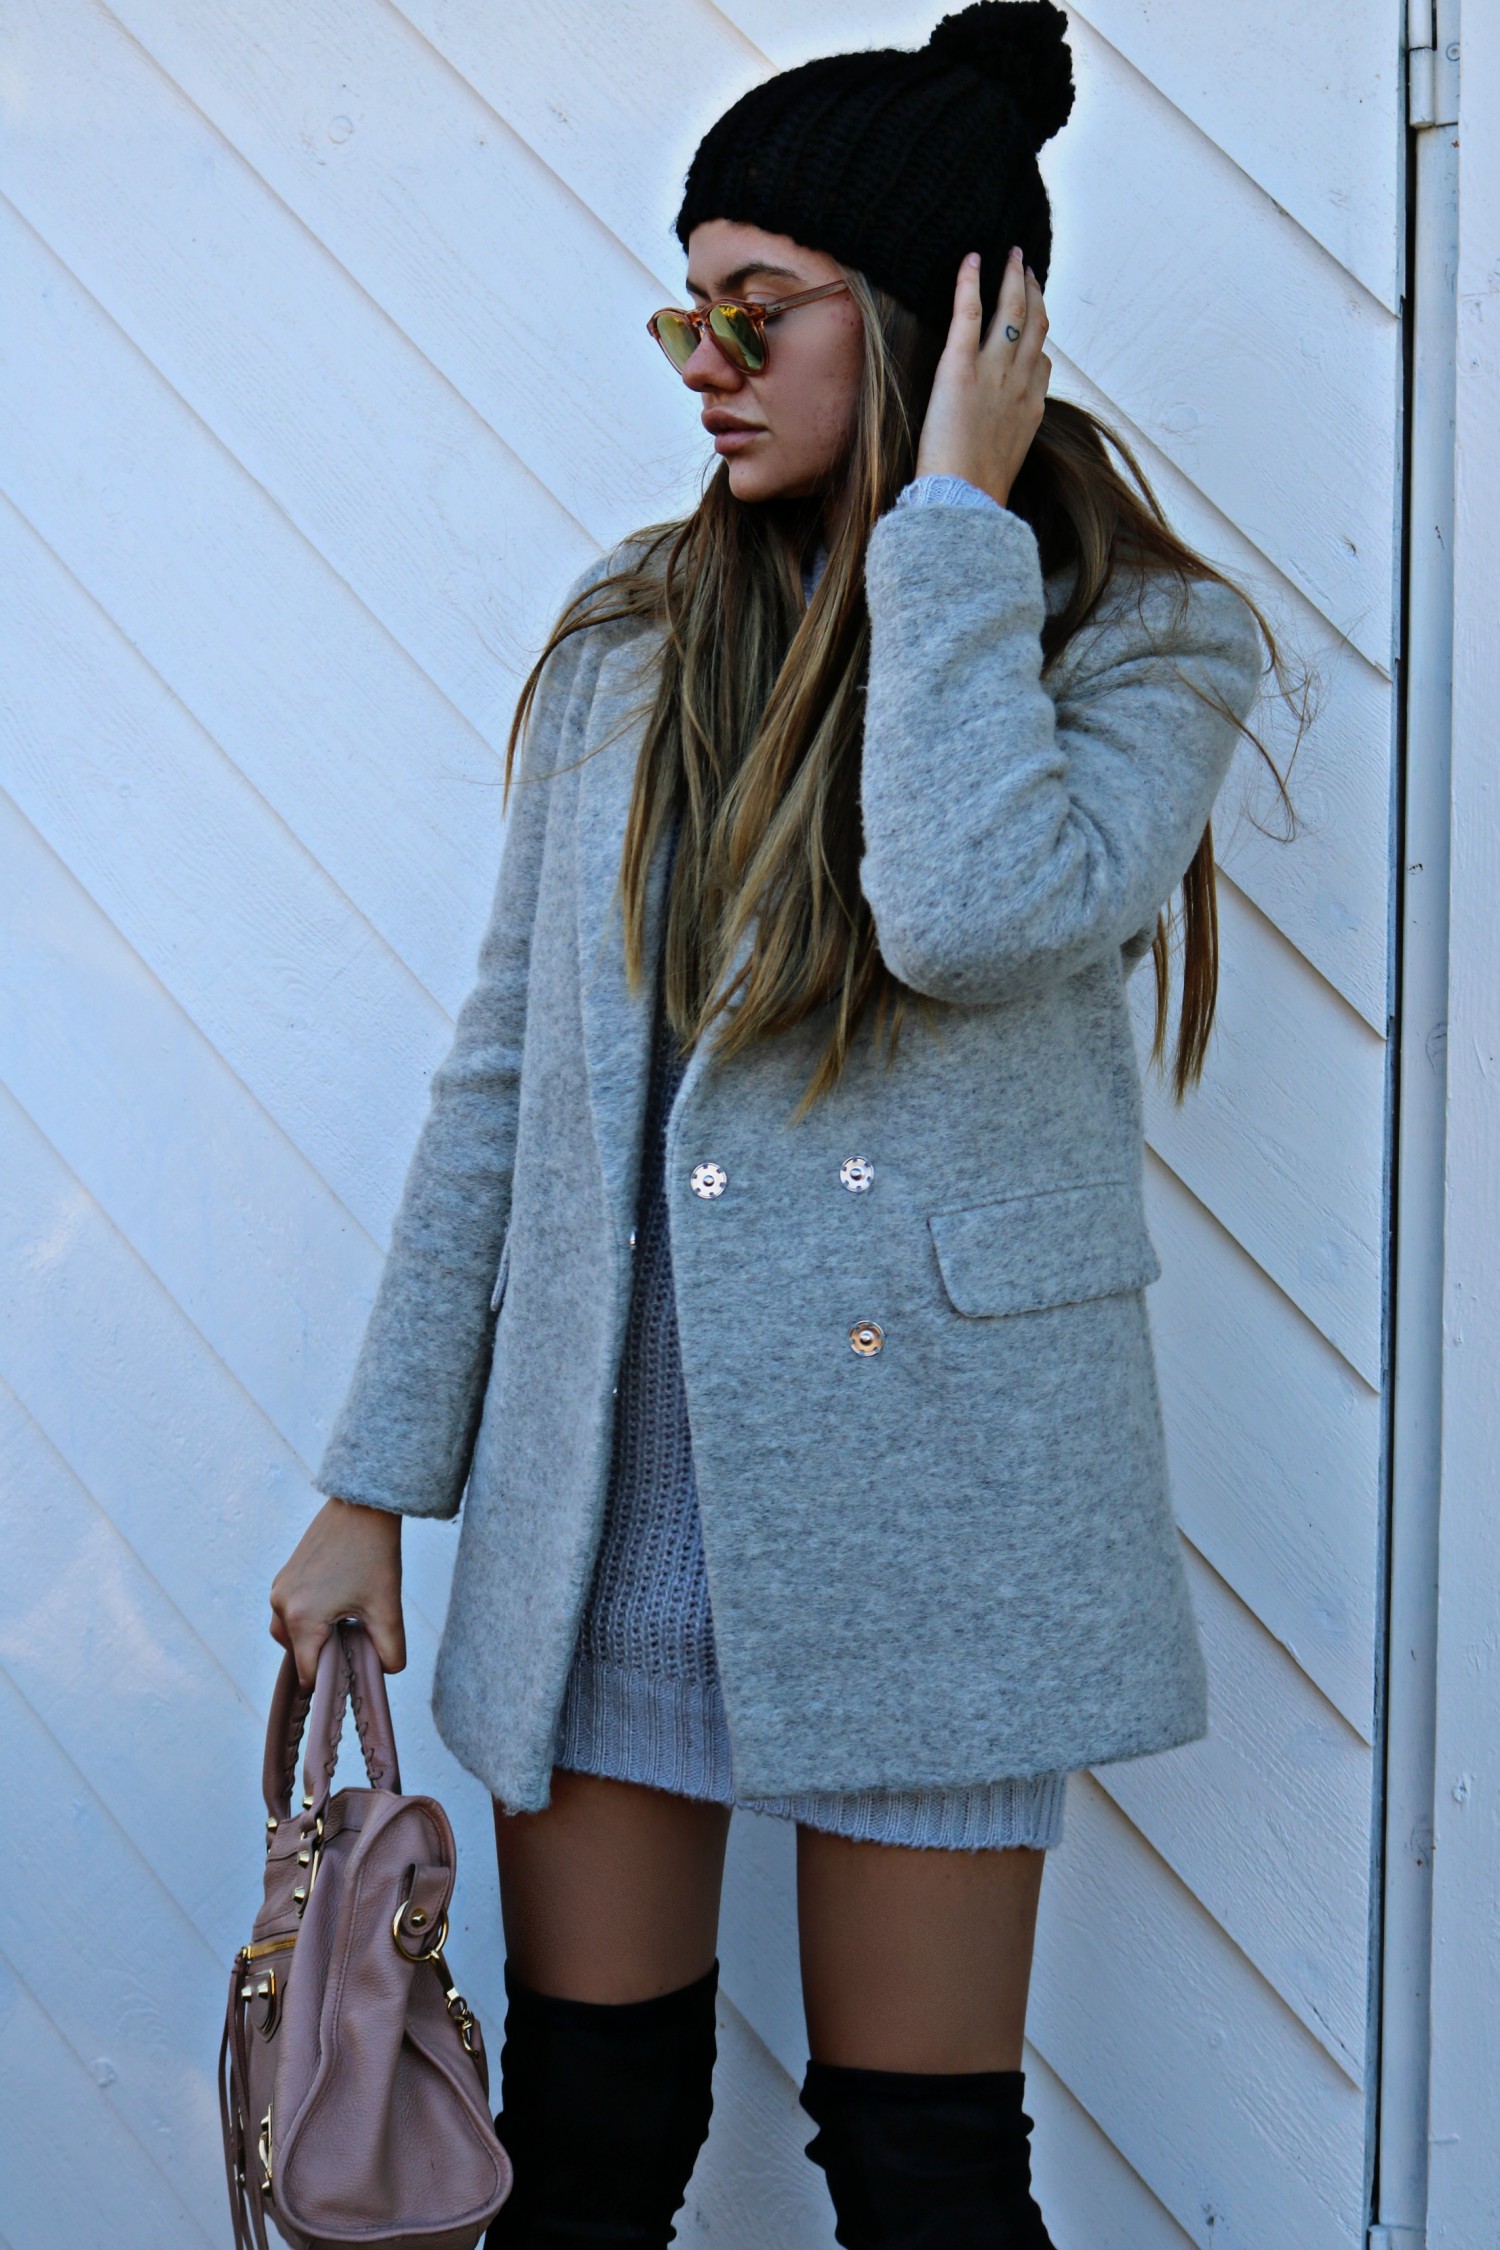 What is your favorite outfit?, Fie Laursen